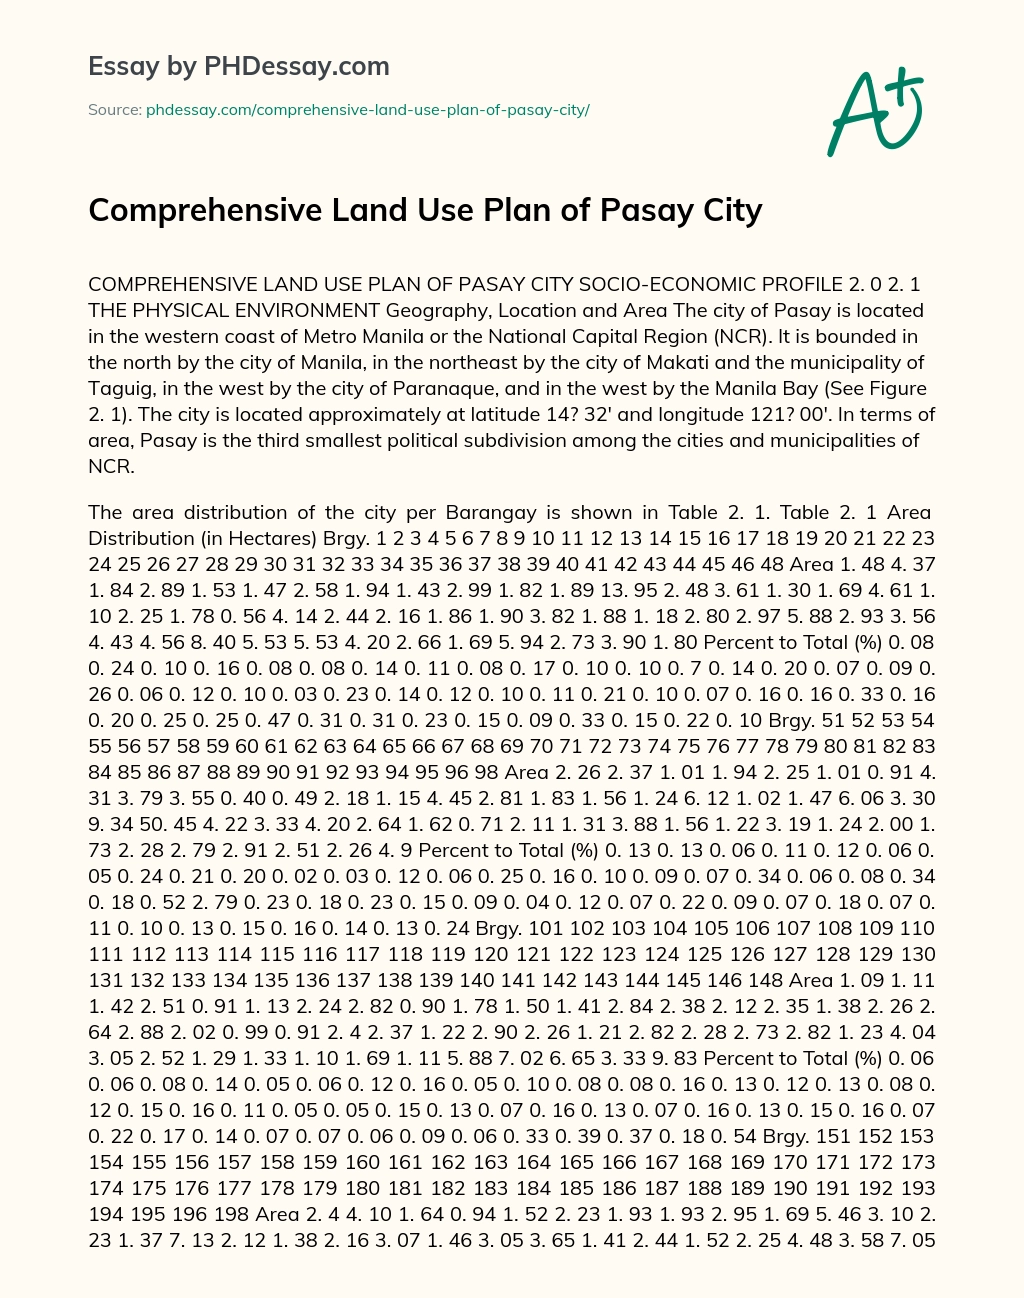 Comprehensive Land Use Plan of Pasay City essay